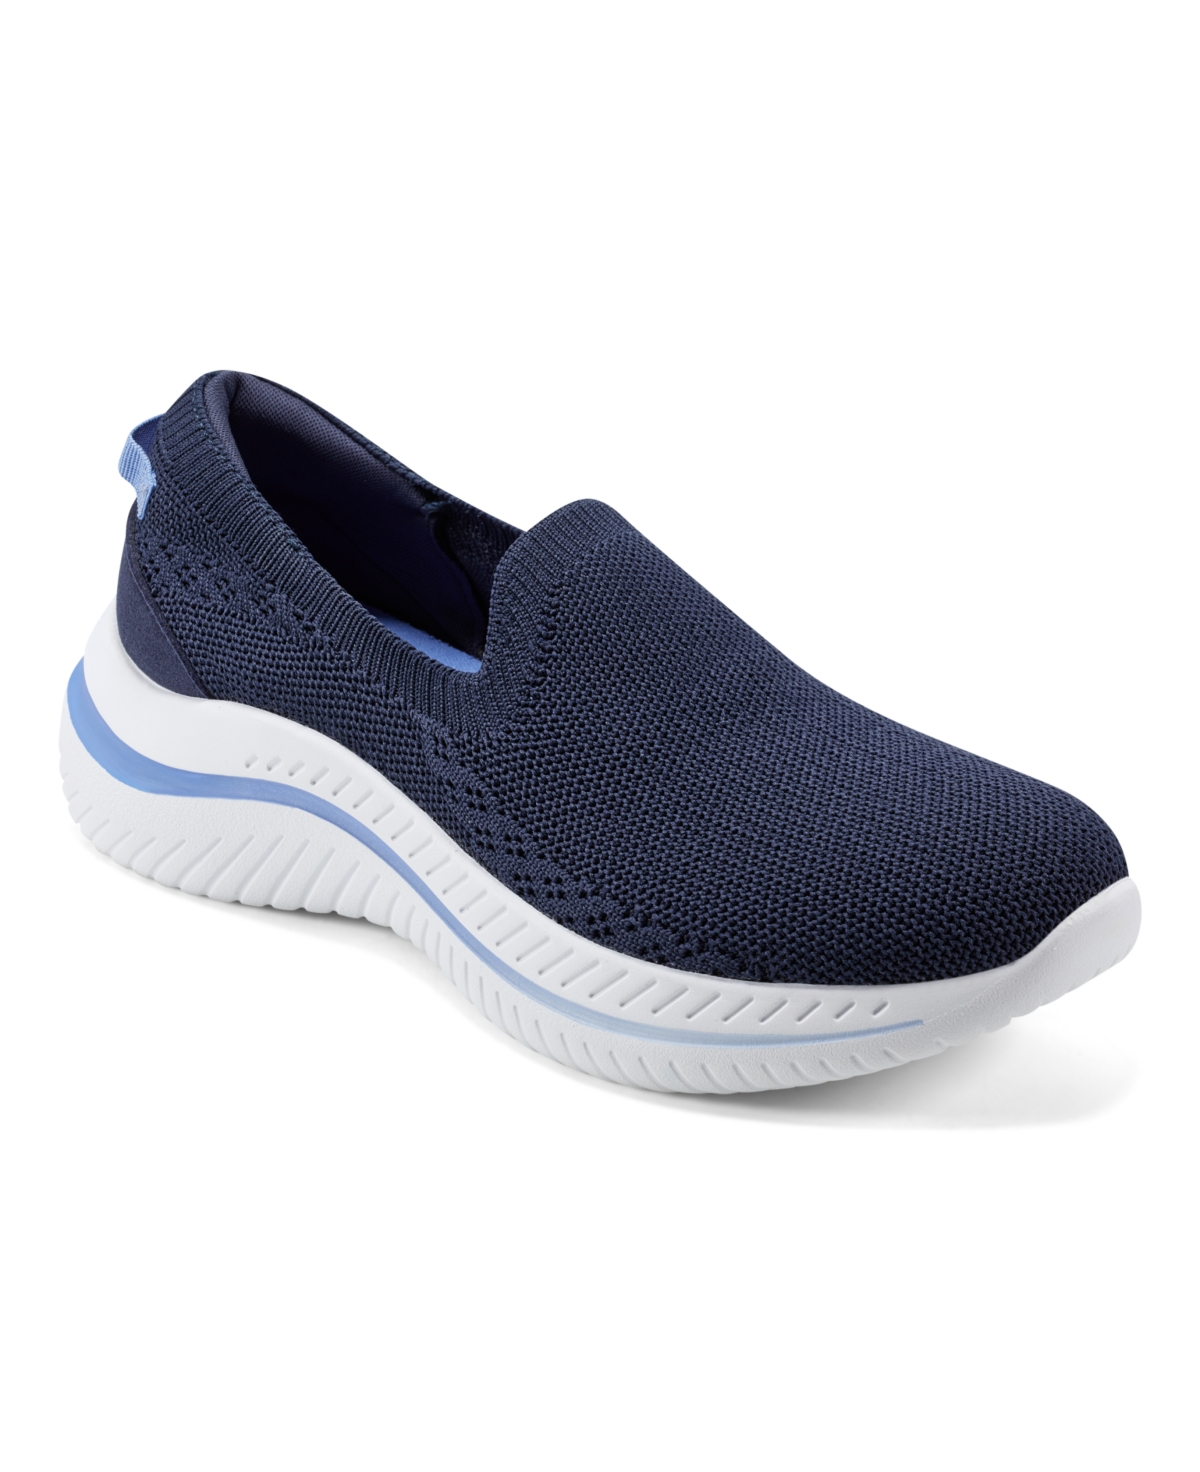 Women's Golda Slip-On Round Toe Casual Shoes - Navy - Textile